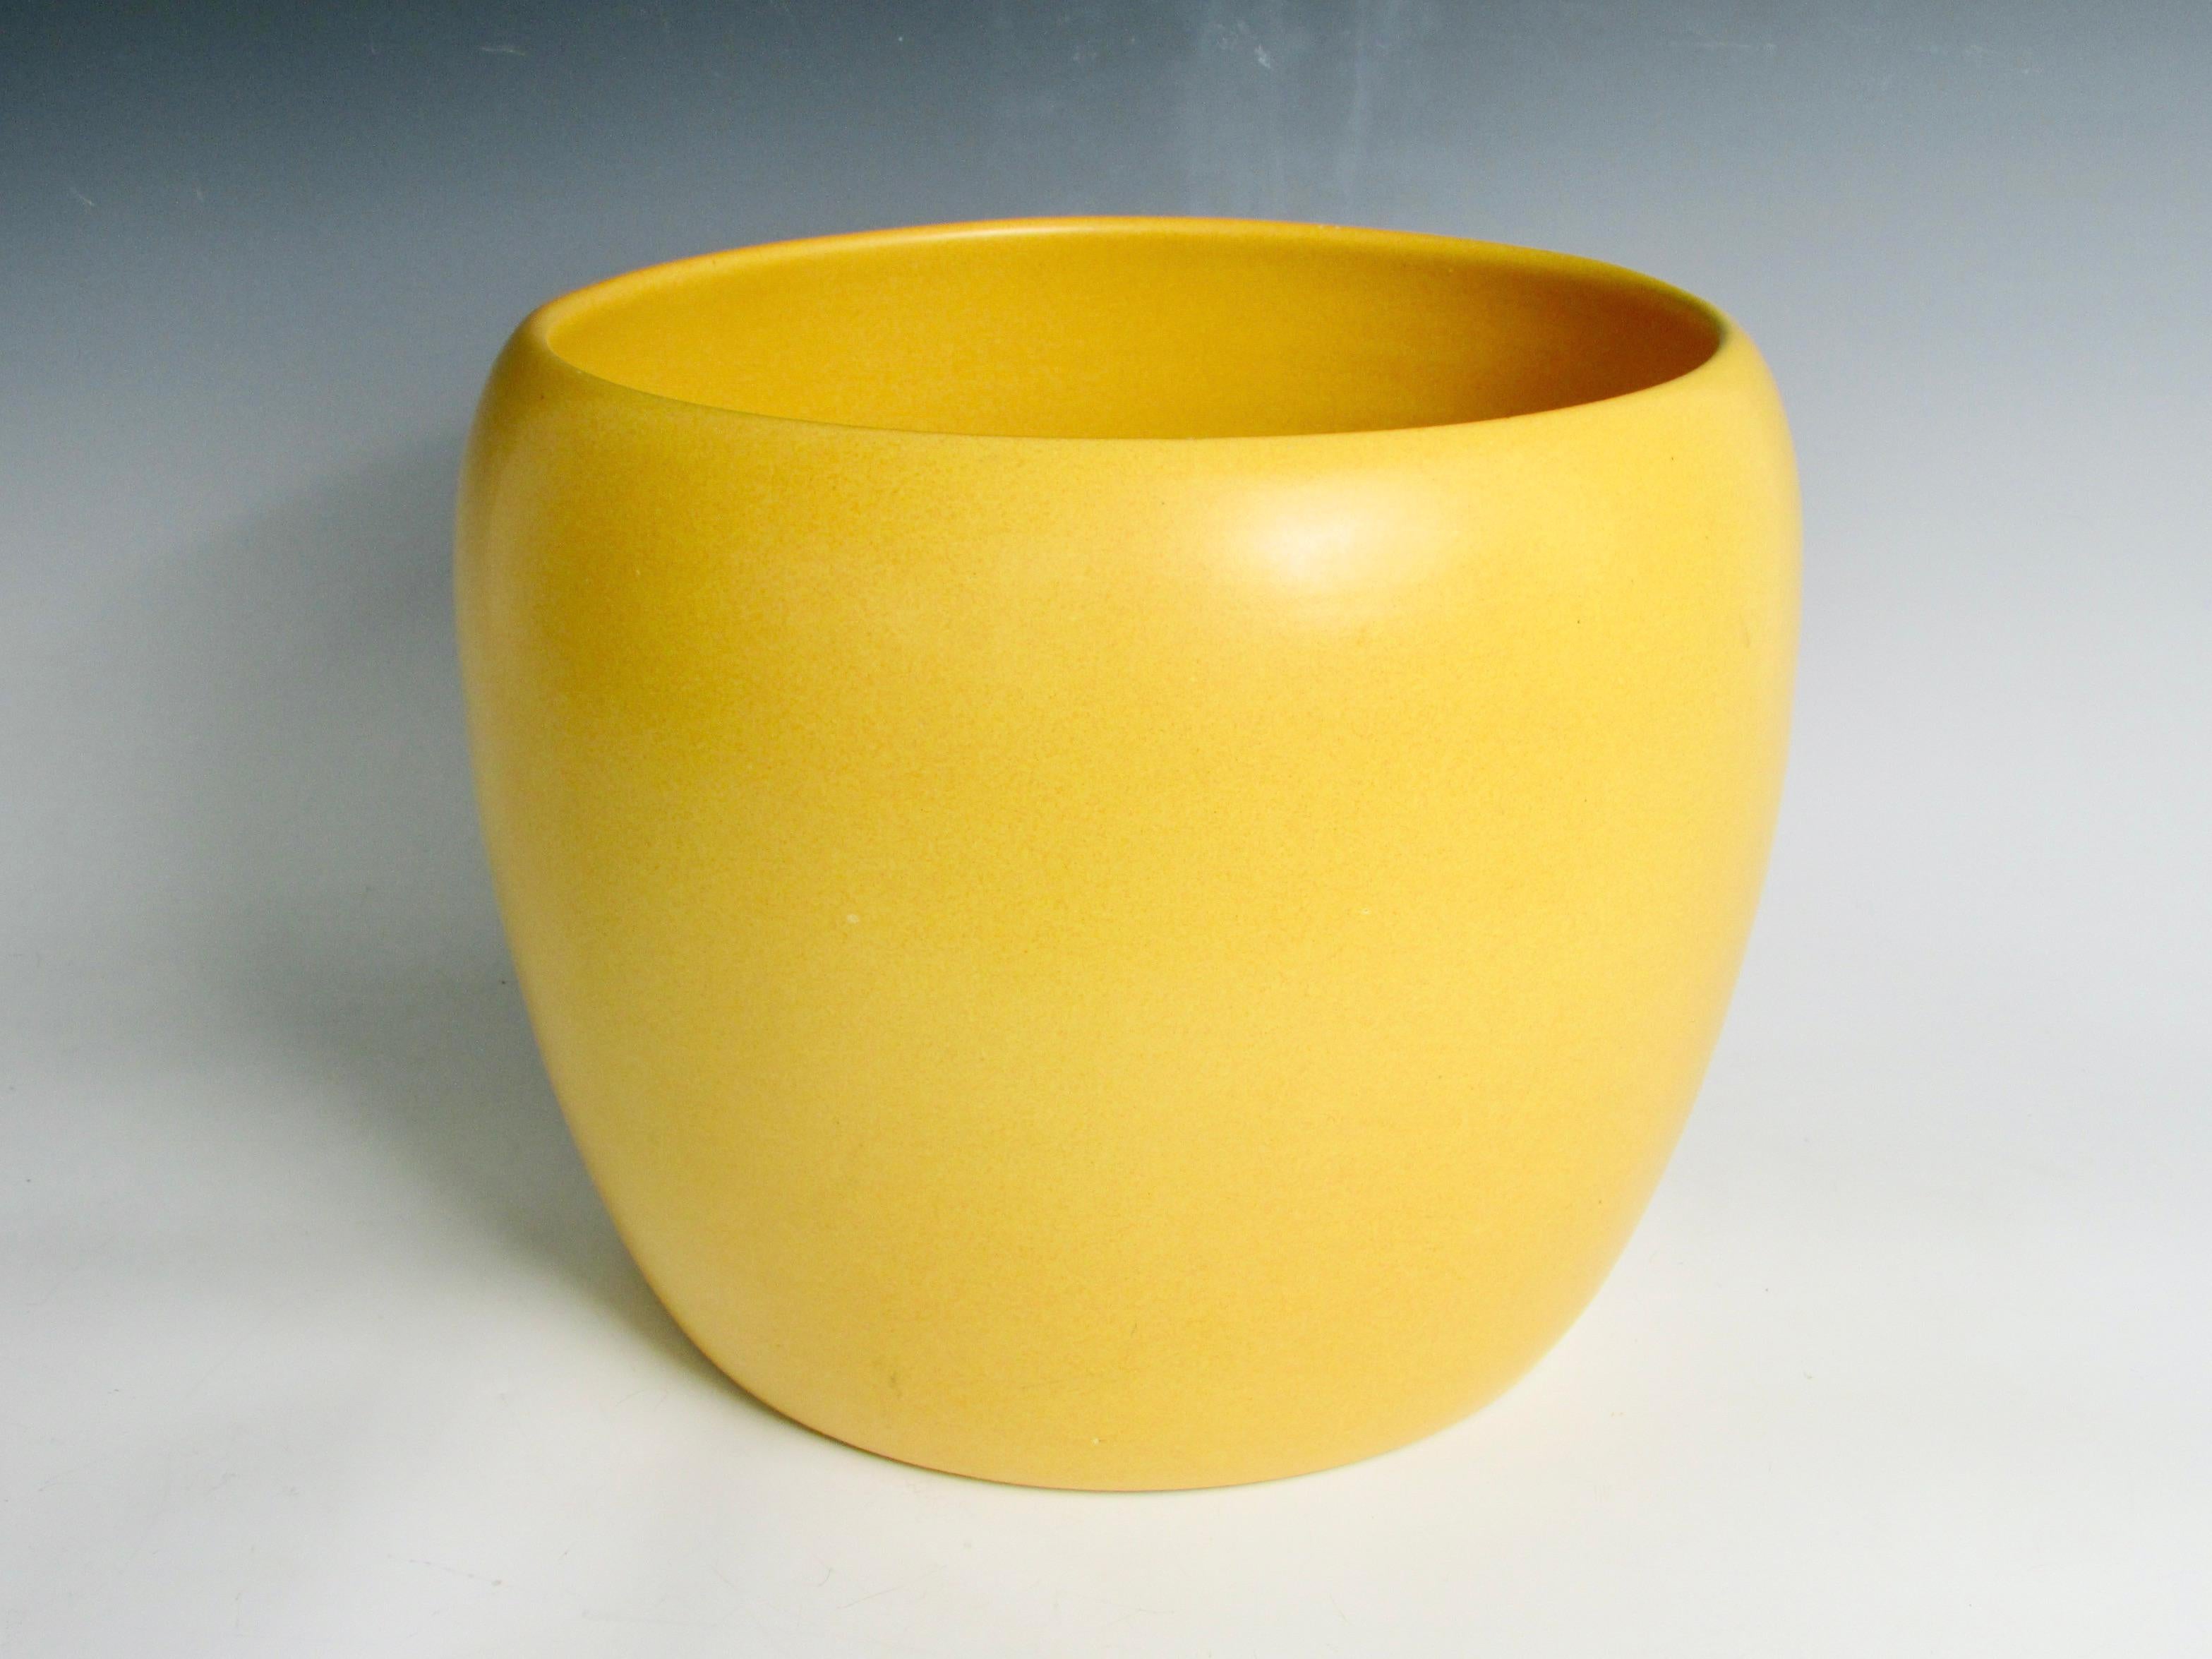 Fine planter pot from Gainey of Laverne California. Nice form, warm ochre matte glaze and excellent condition.